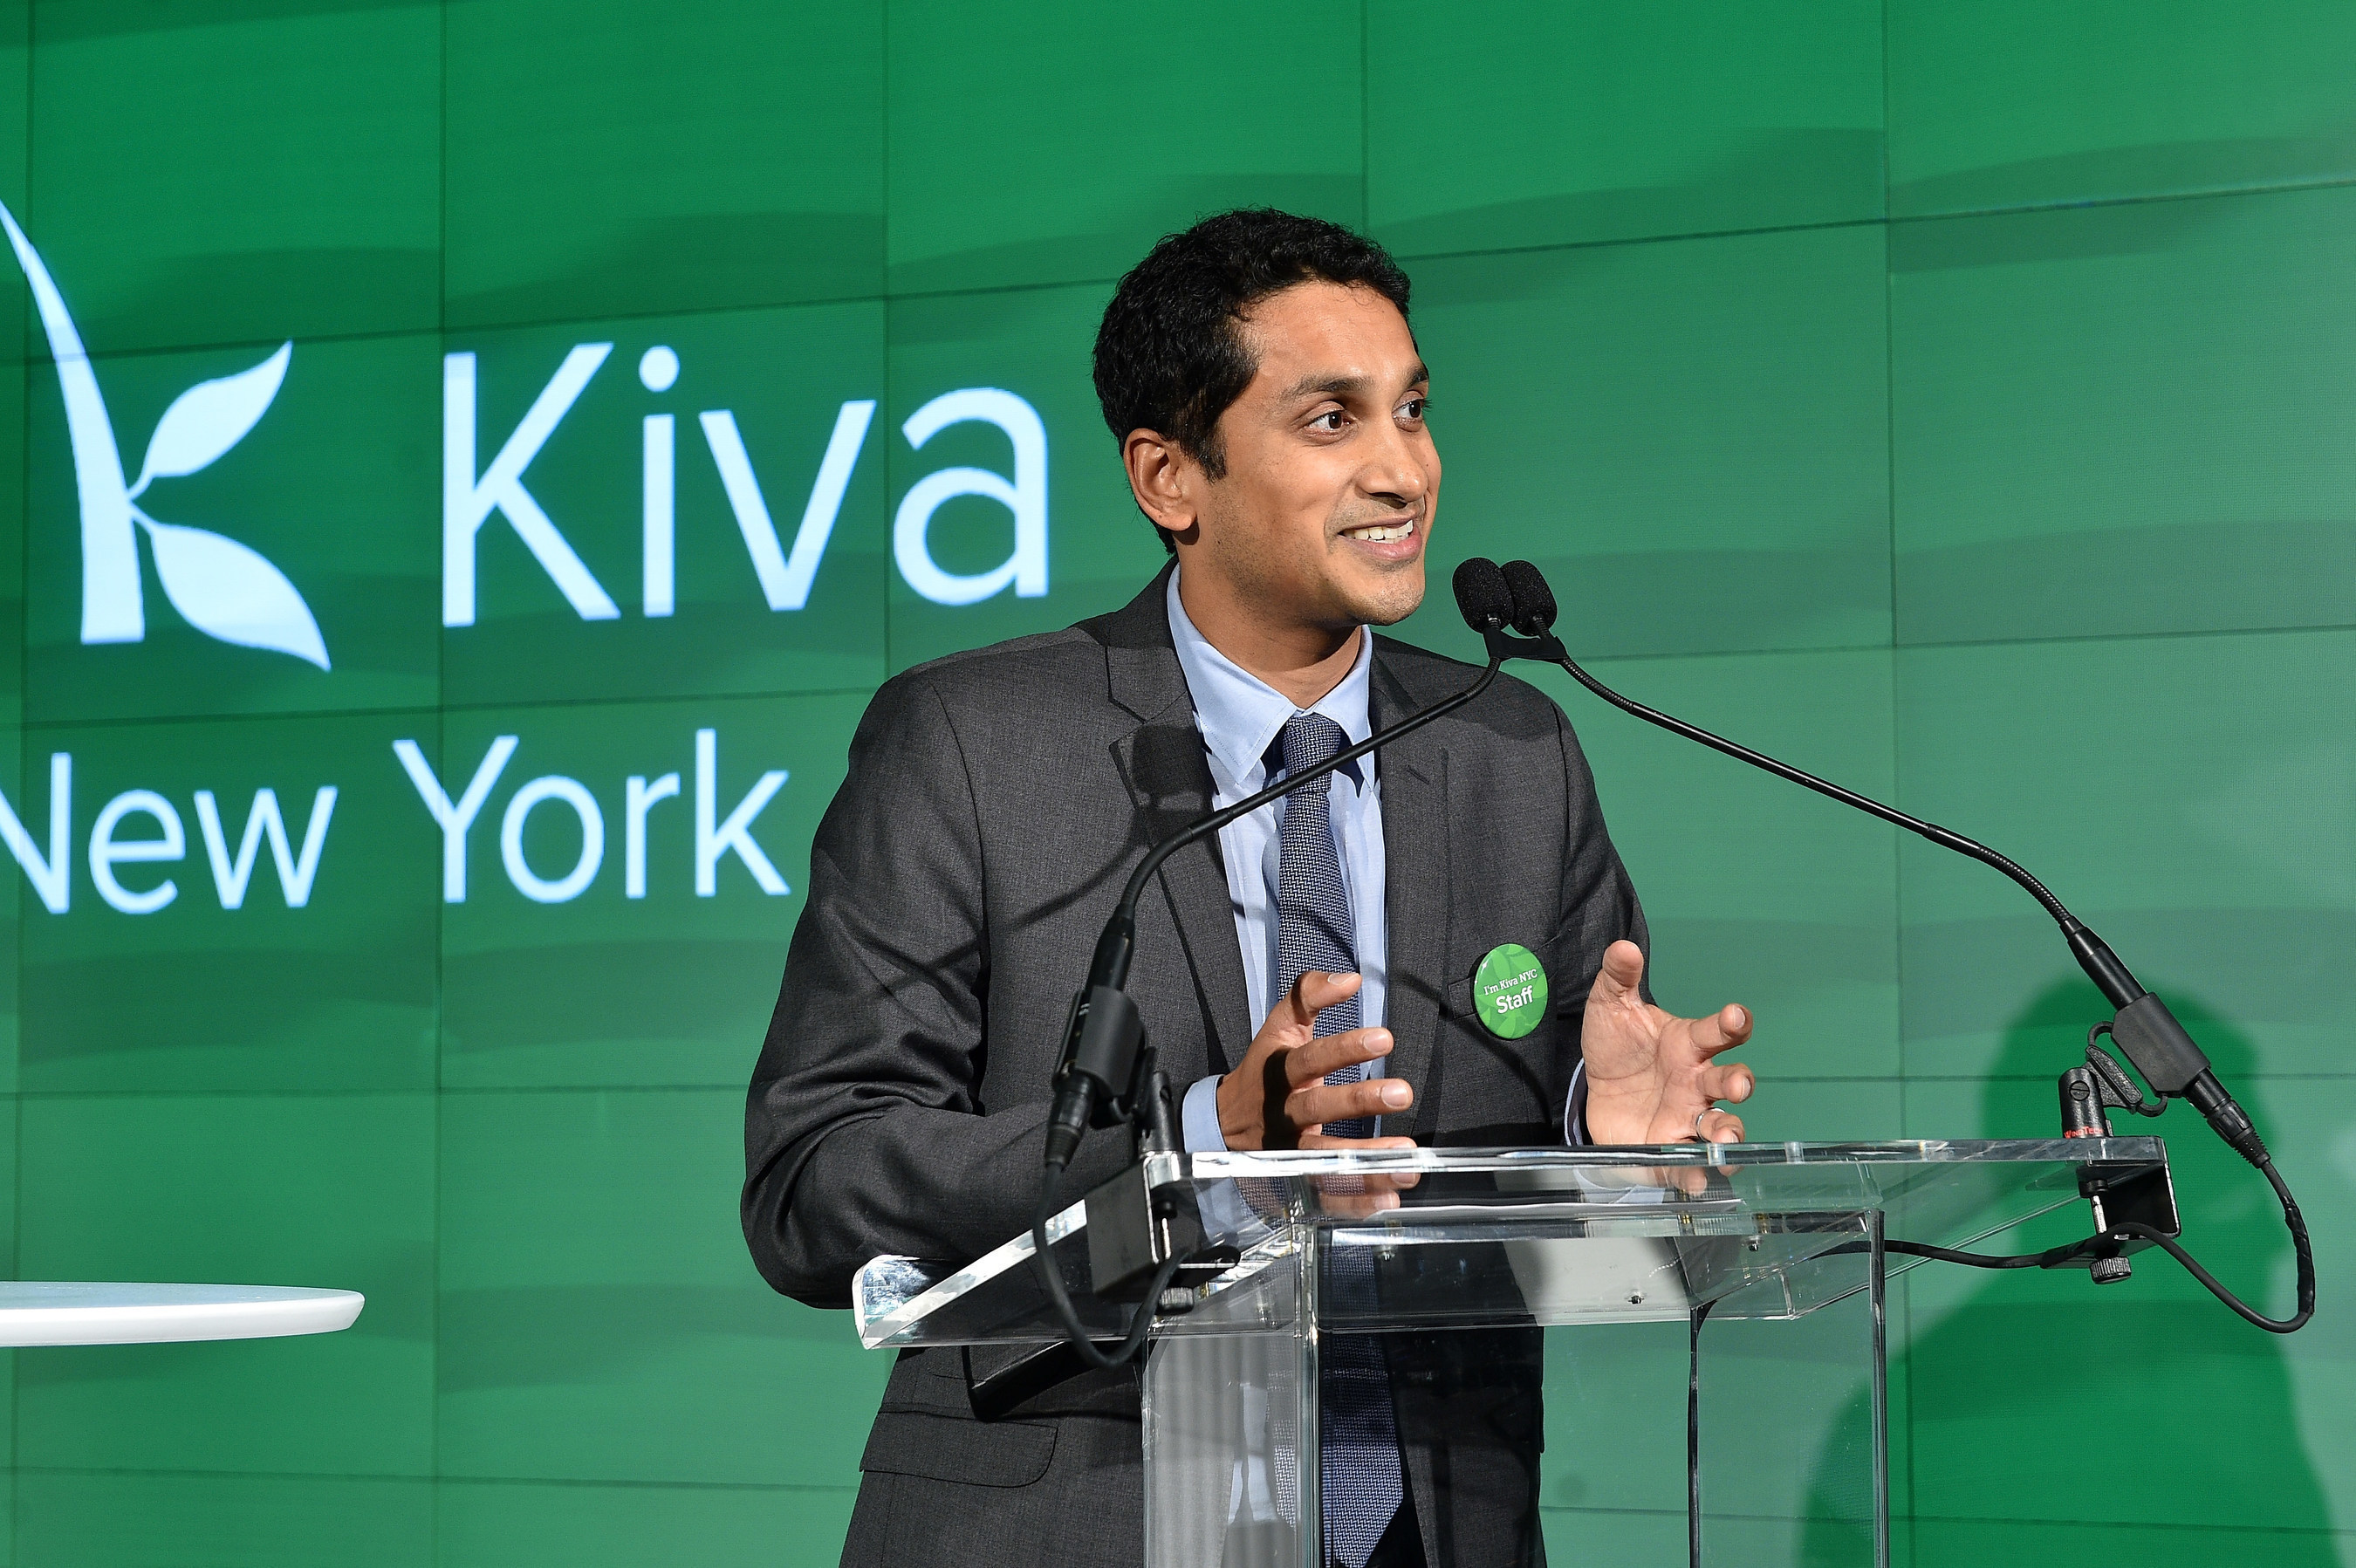 Kiva President and Co-Founder Premal Shah addresses the audience at the Kiva NYC Launch event in New York City on December 9, 2015. (Photo by Larry Busacca/Getty Images for Kiva)